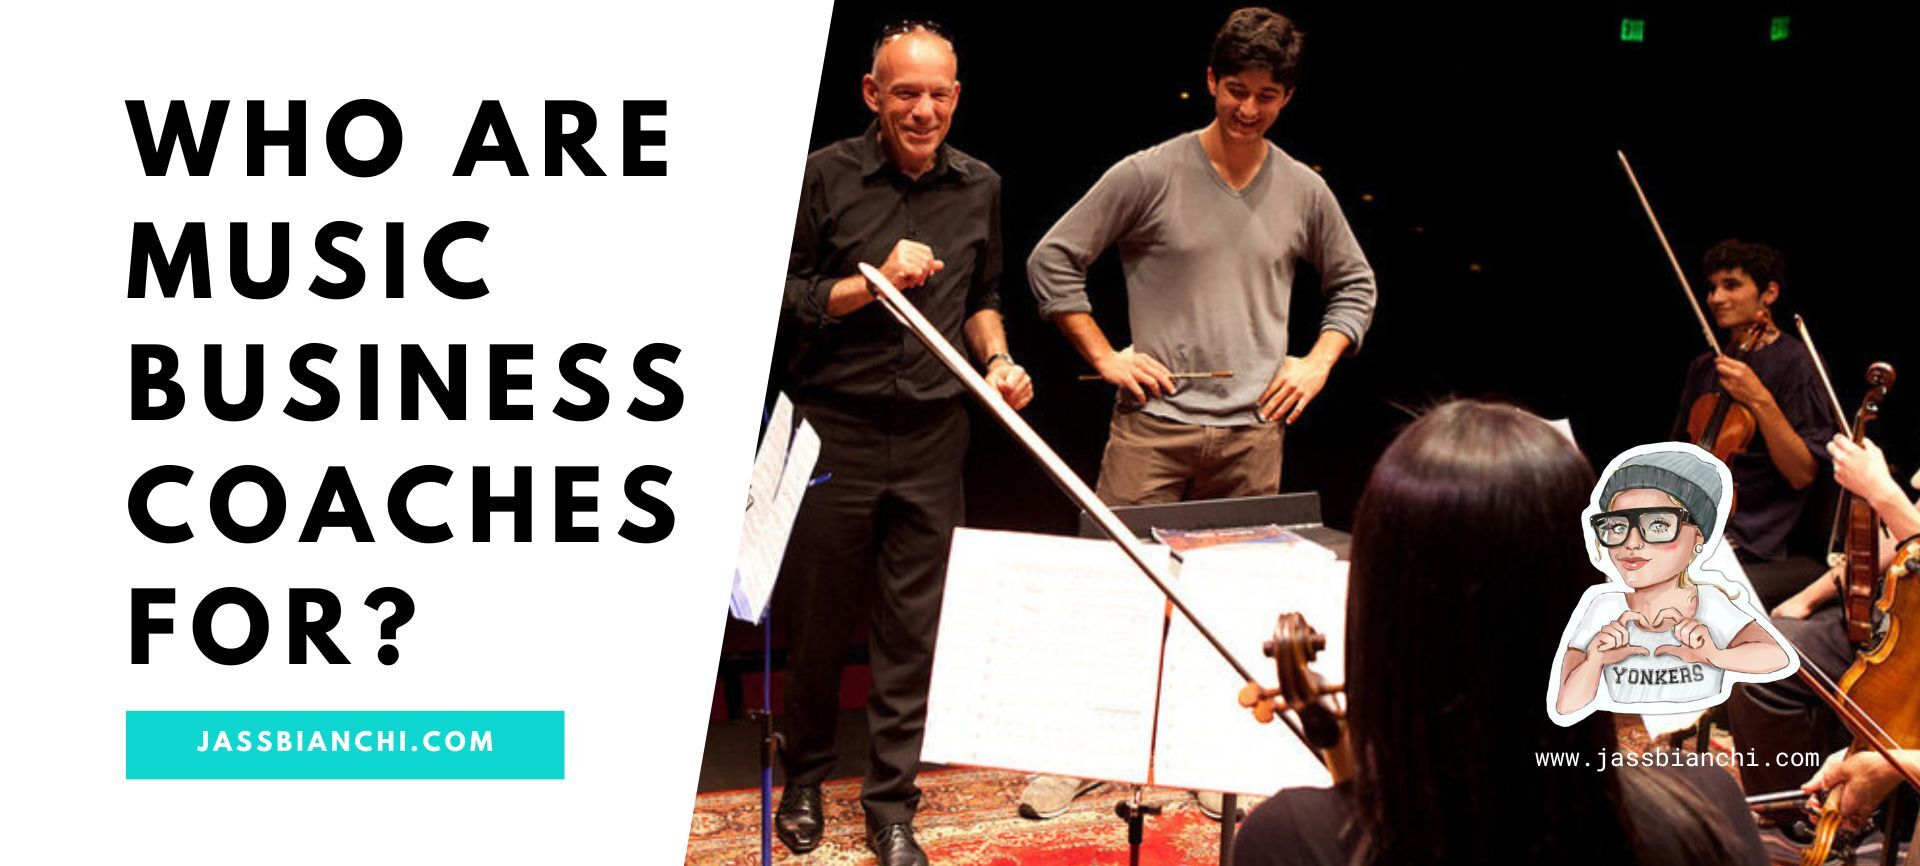 Who are Music Business Coaches for?